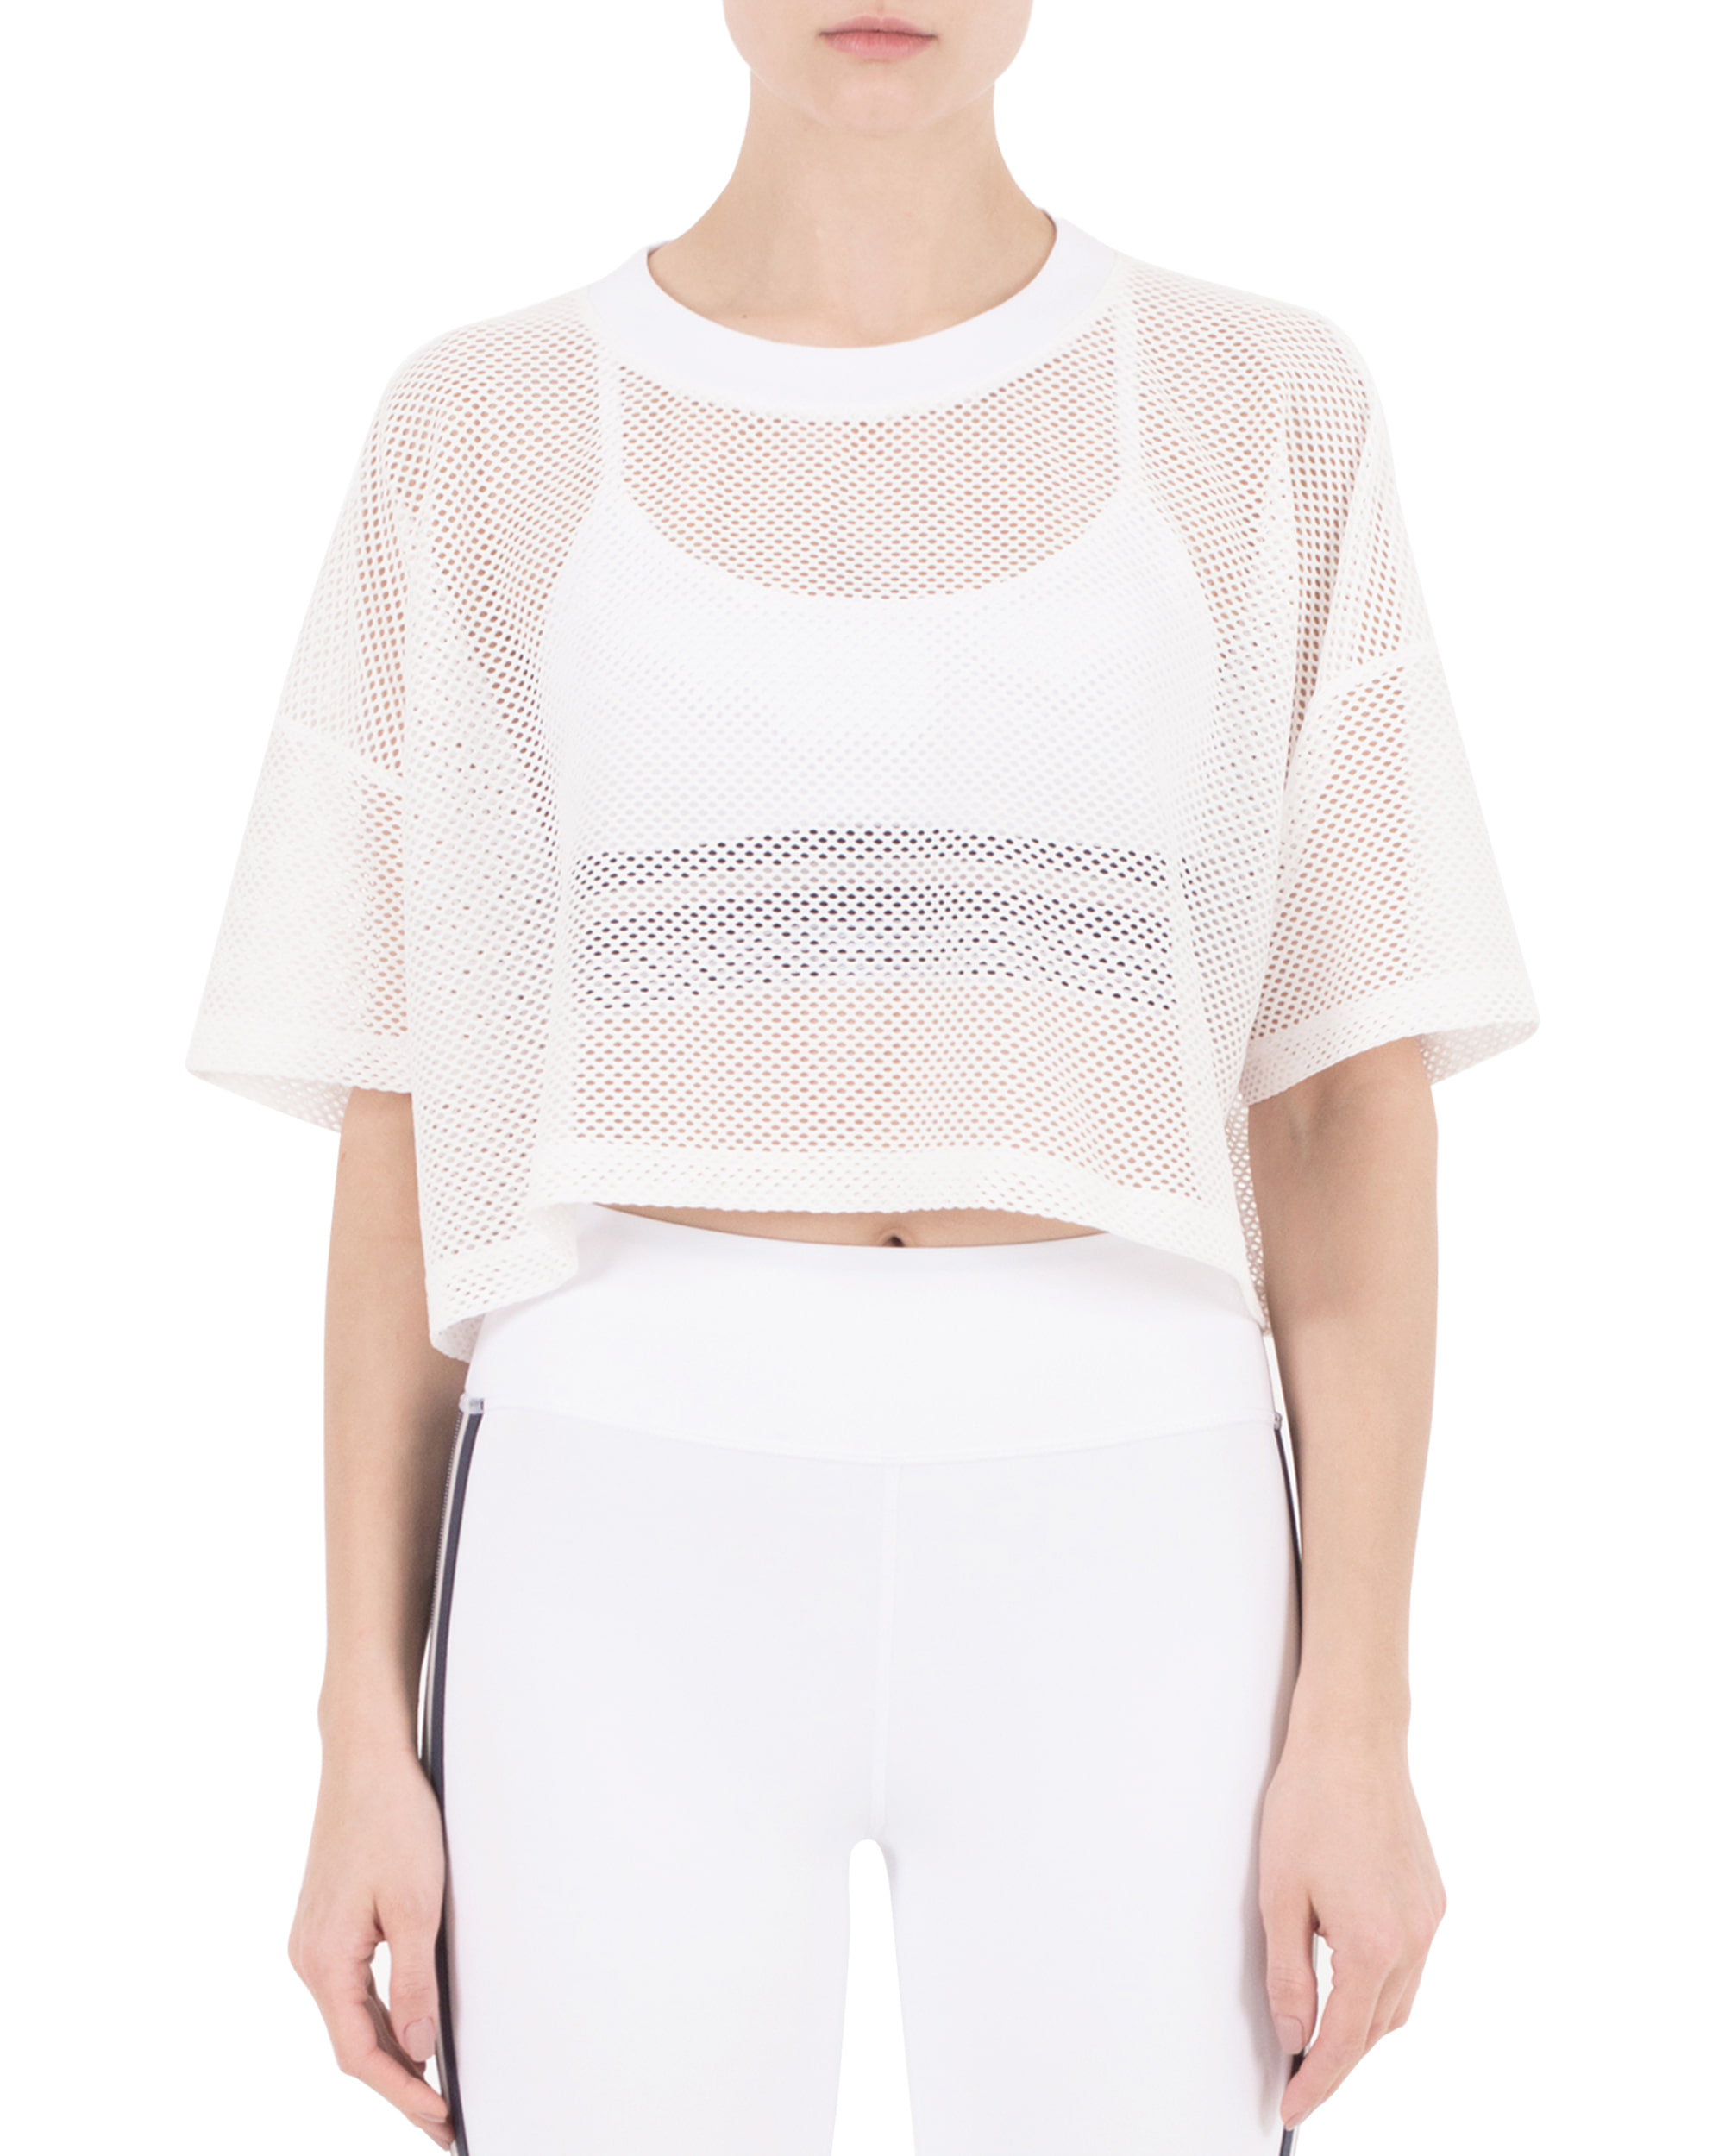 LISSY TOP WHITE